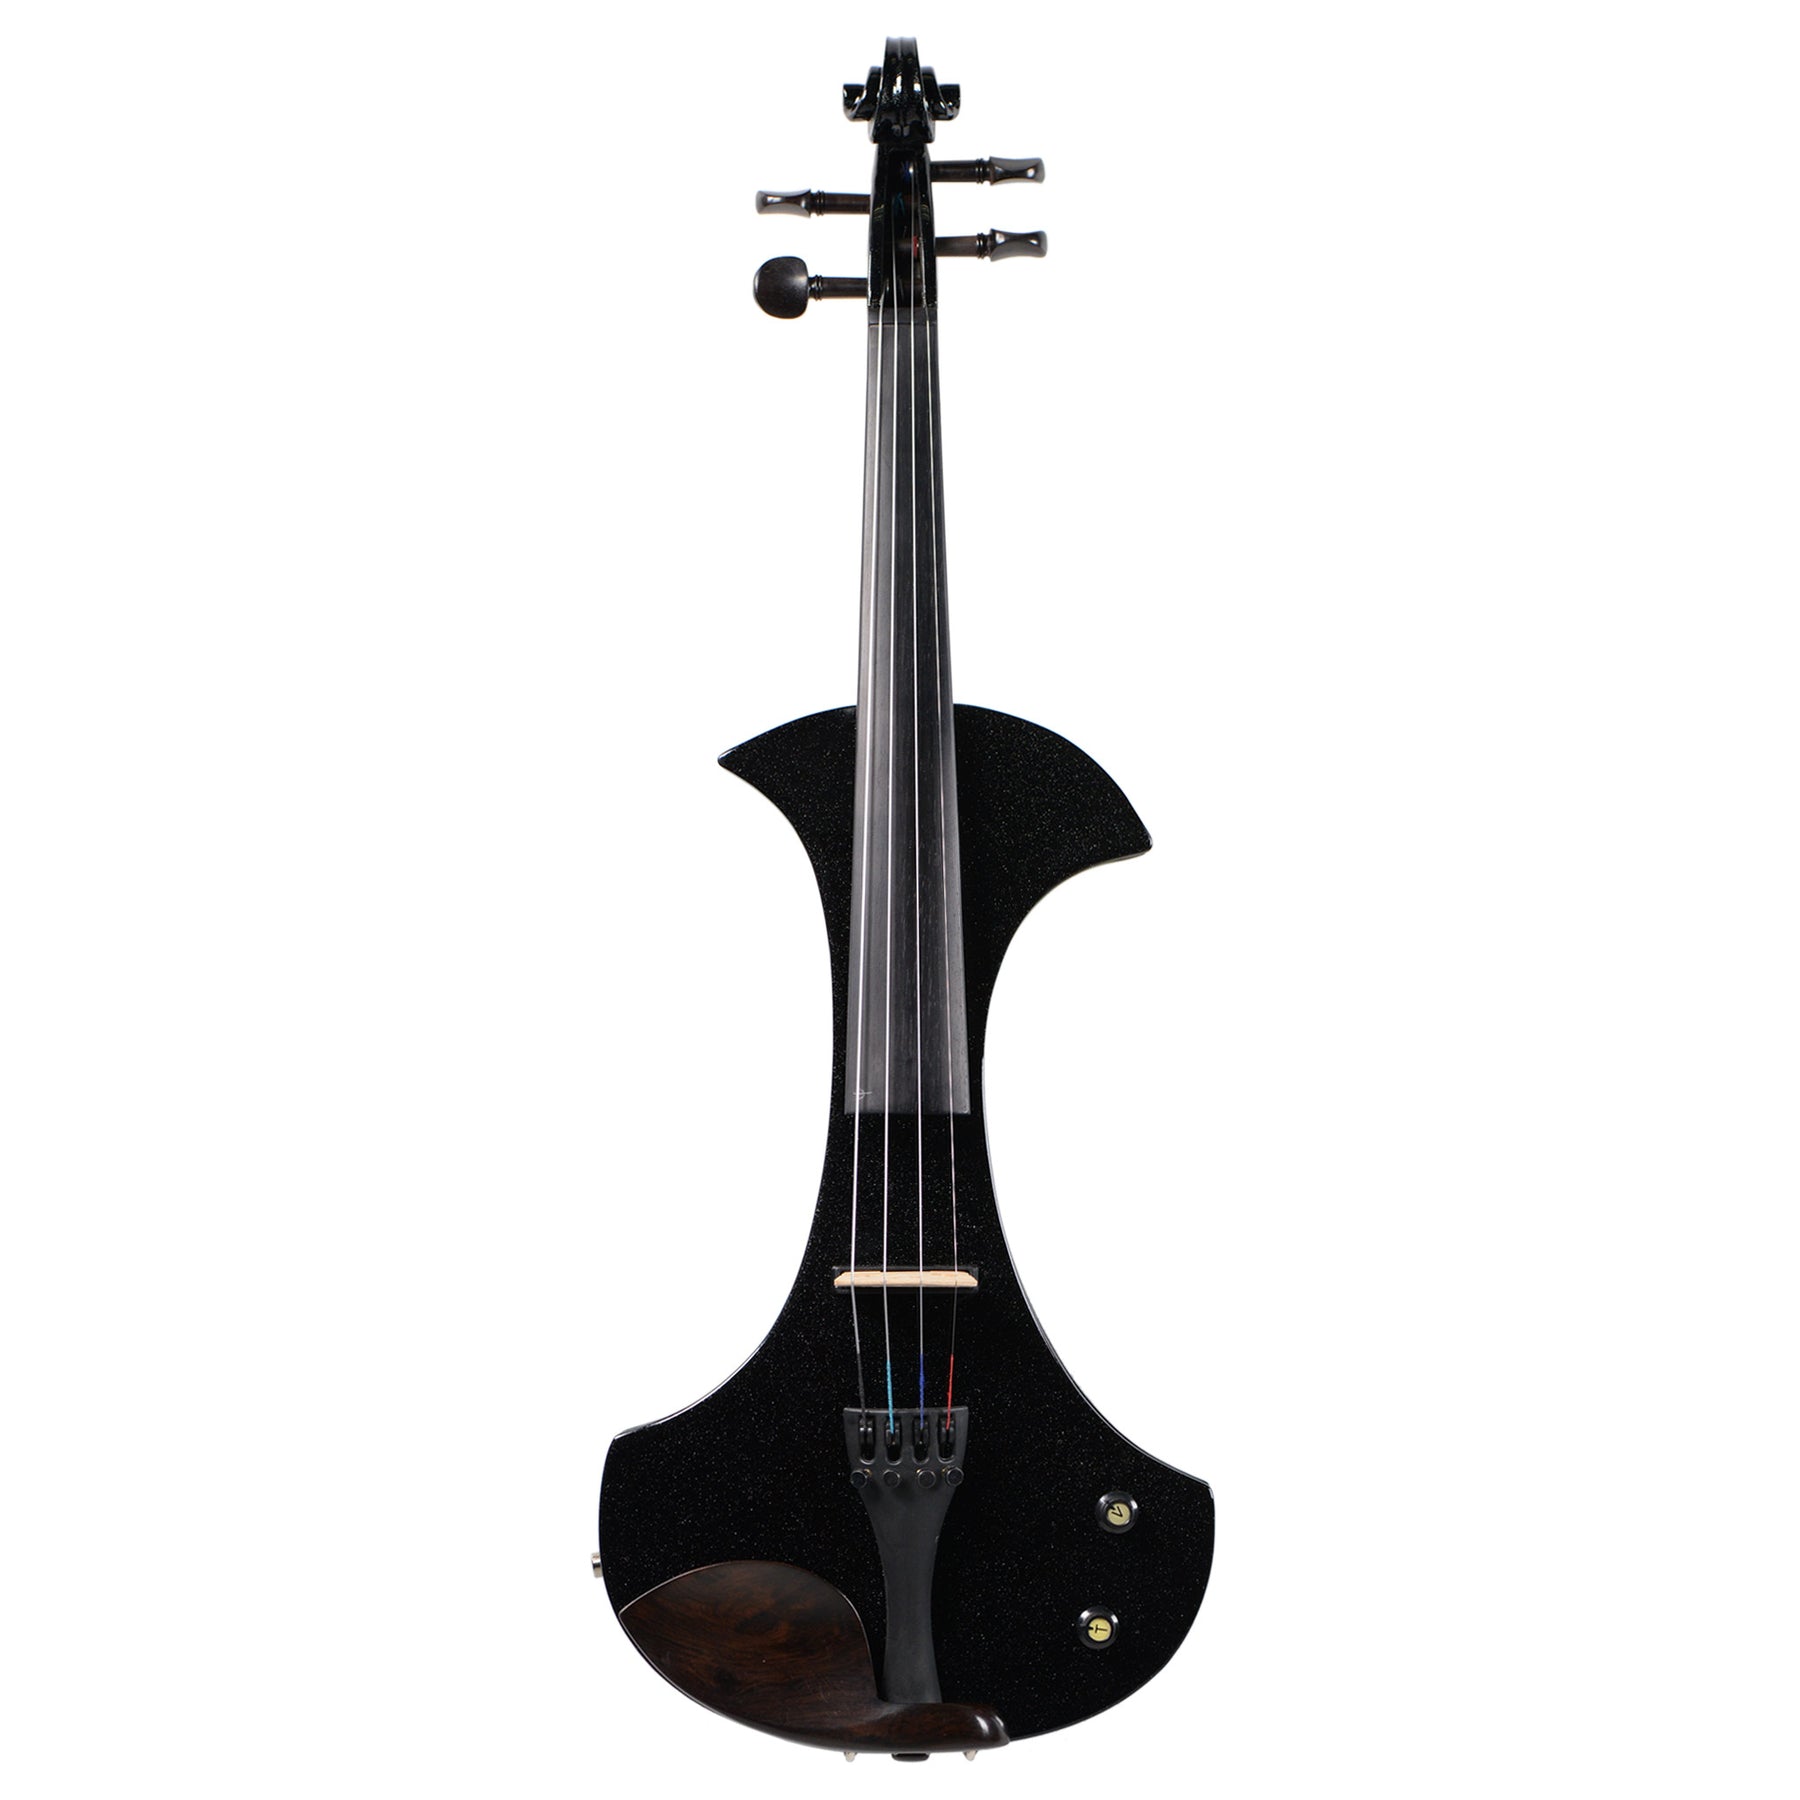 Tower Strings Electric Pro Violin Outfit